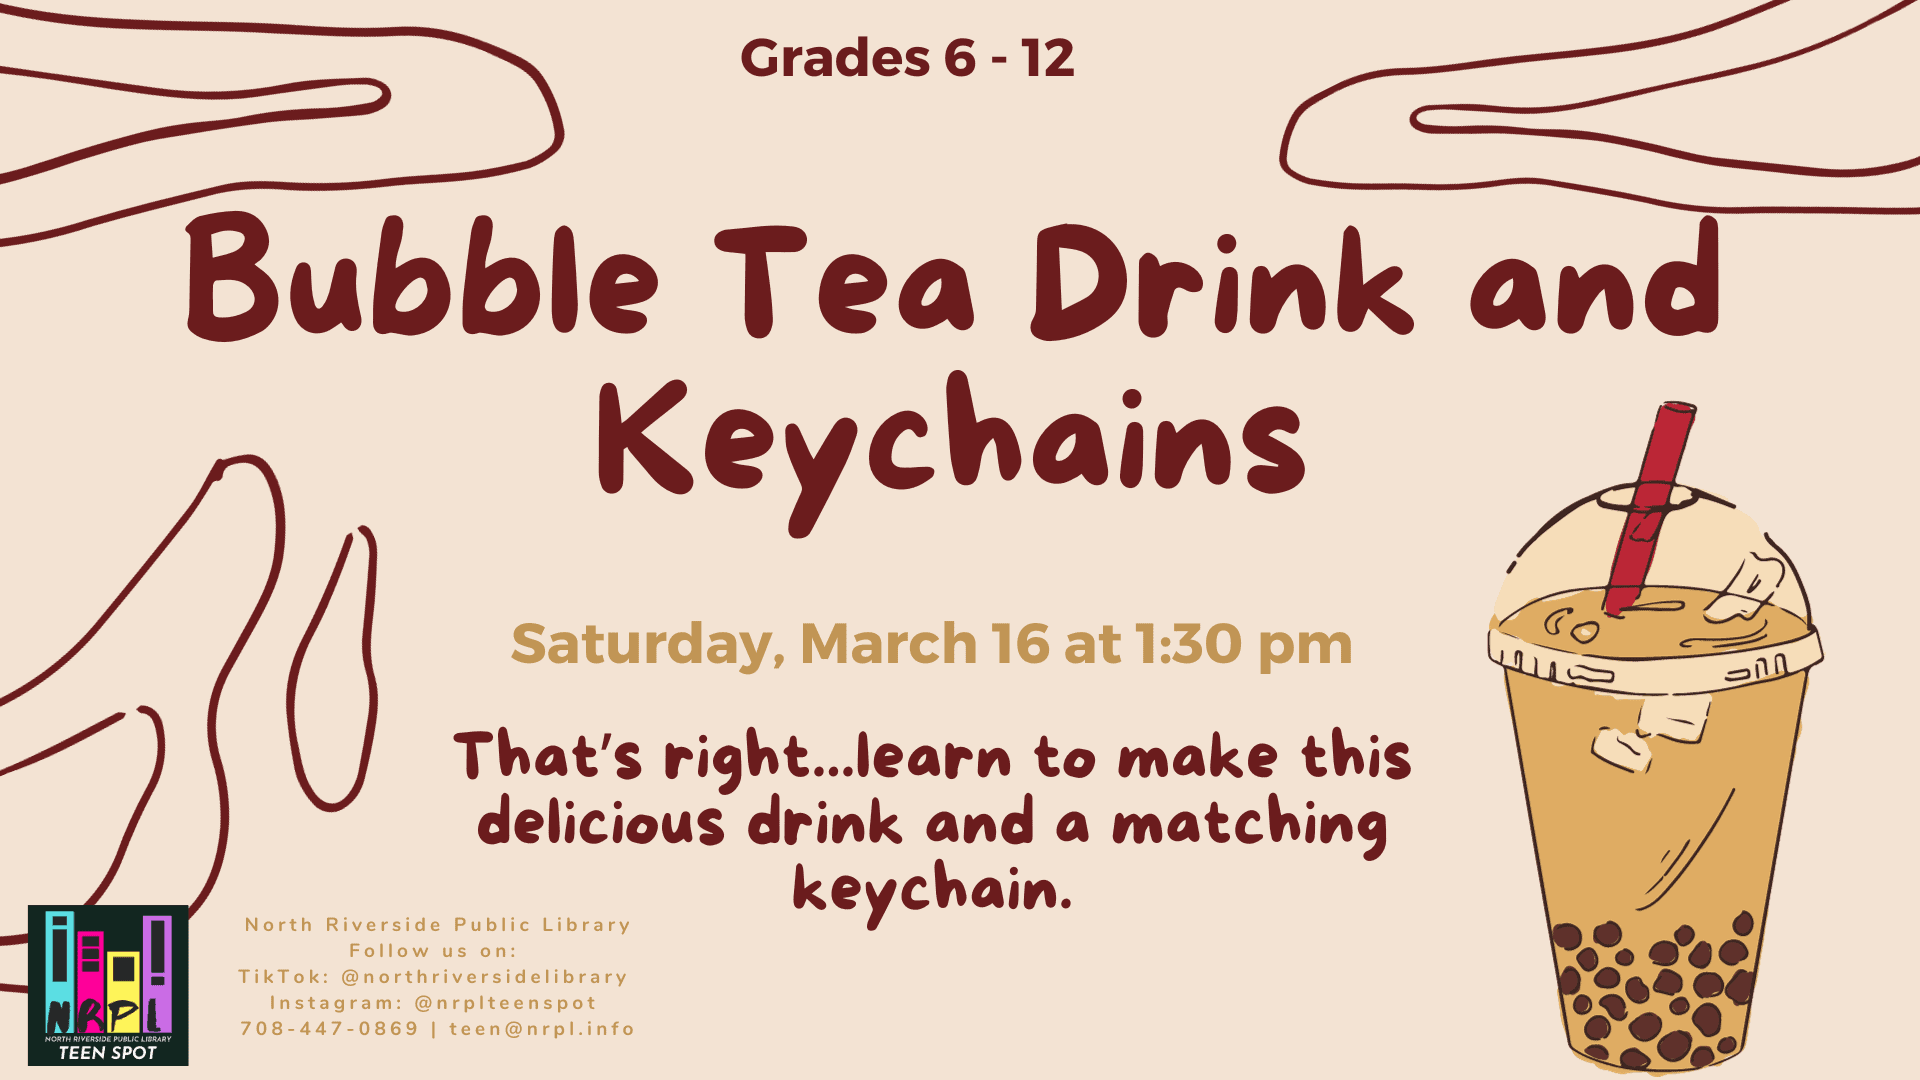 Bubble tea drink and keychains flyer